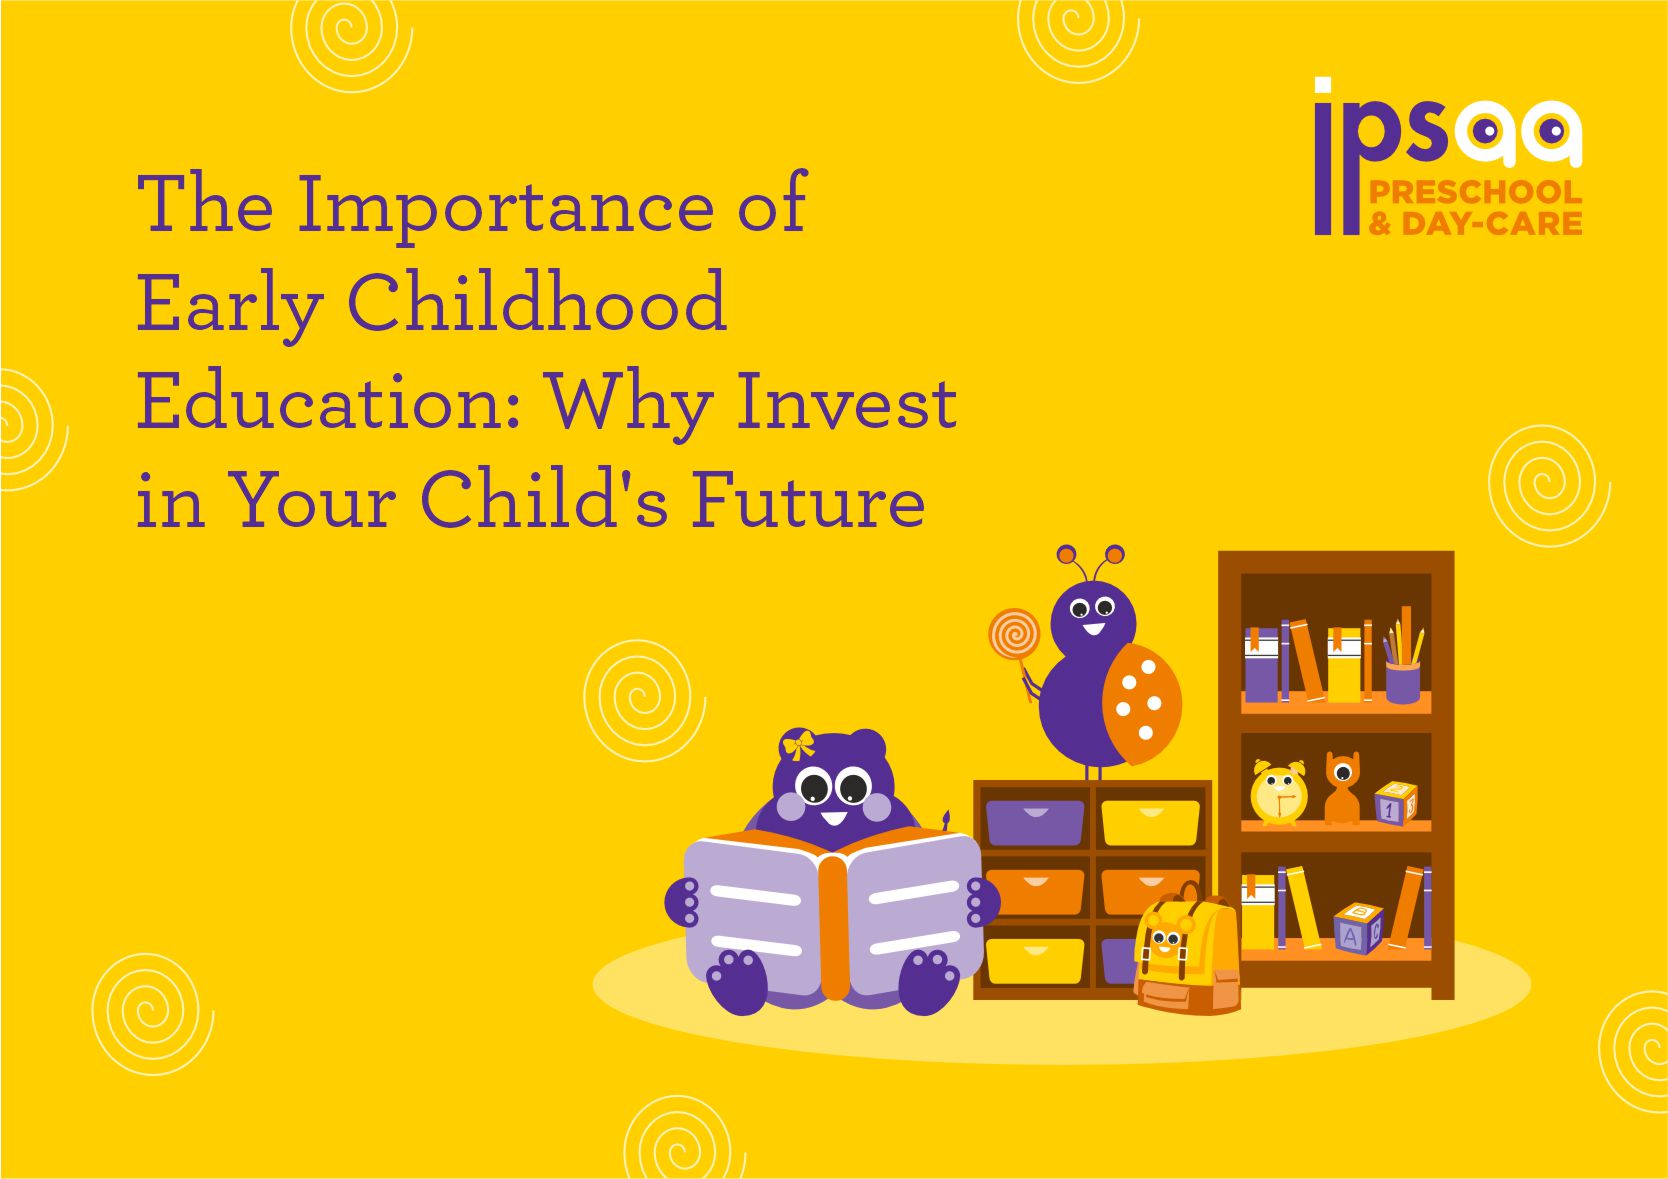 The Importance of Early Childhood Education: Why Invest in Your Child’s Future